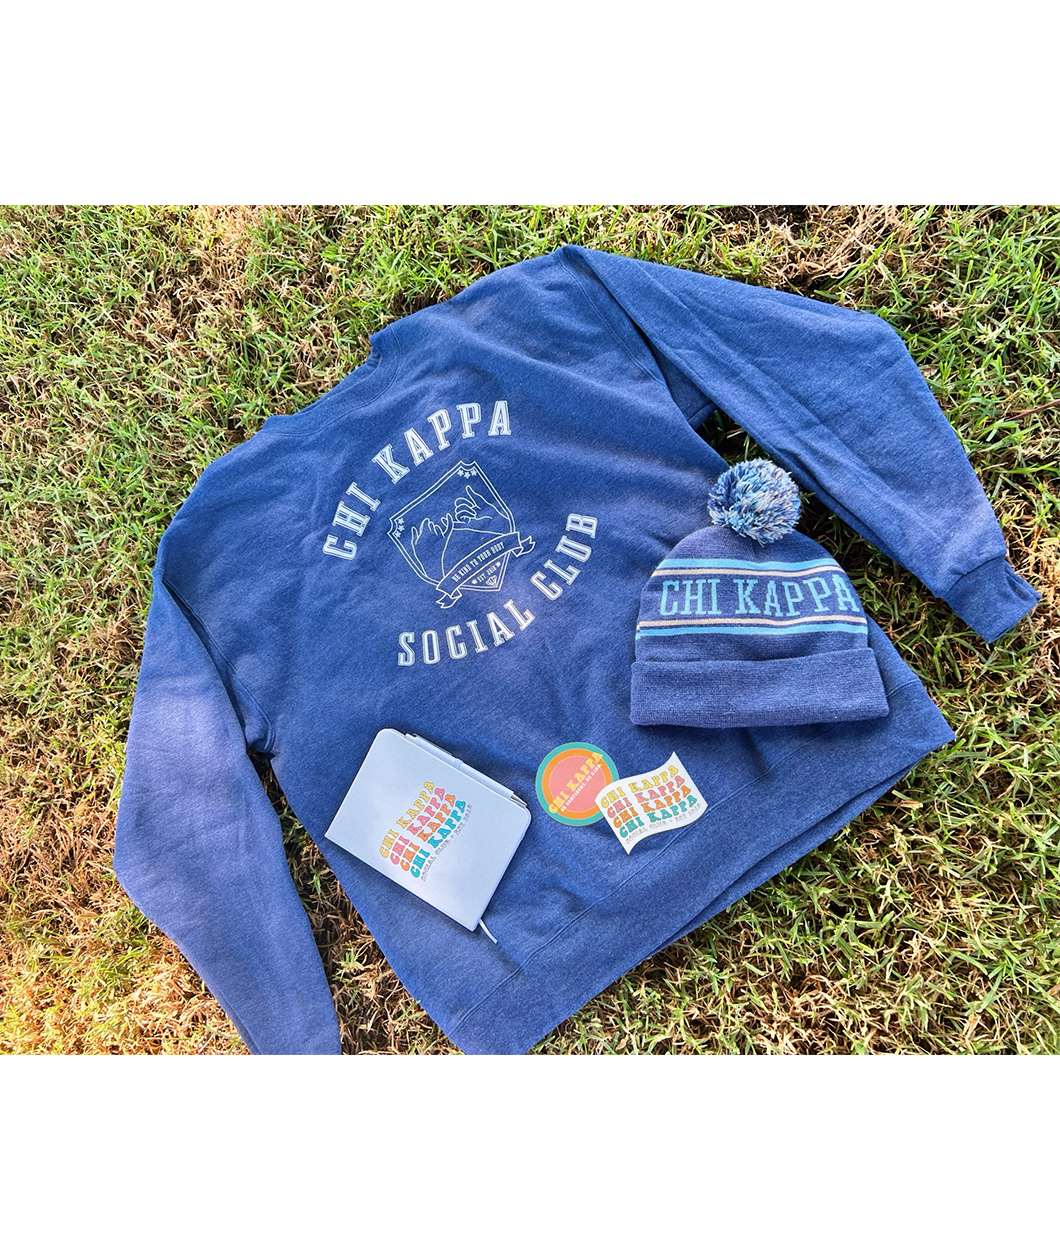 A blue crewneck that reads "Chi Kappa; Social Club" laying on grass with a white journal, two stickers and a blue knit beanie on top. All part of the Chi Kappa collection from Sierra Schultzzie.